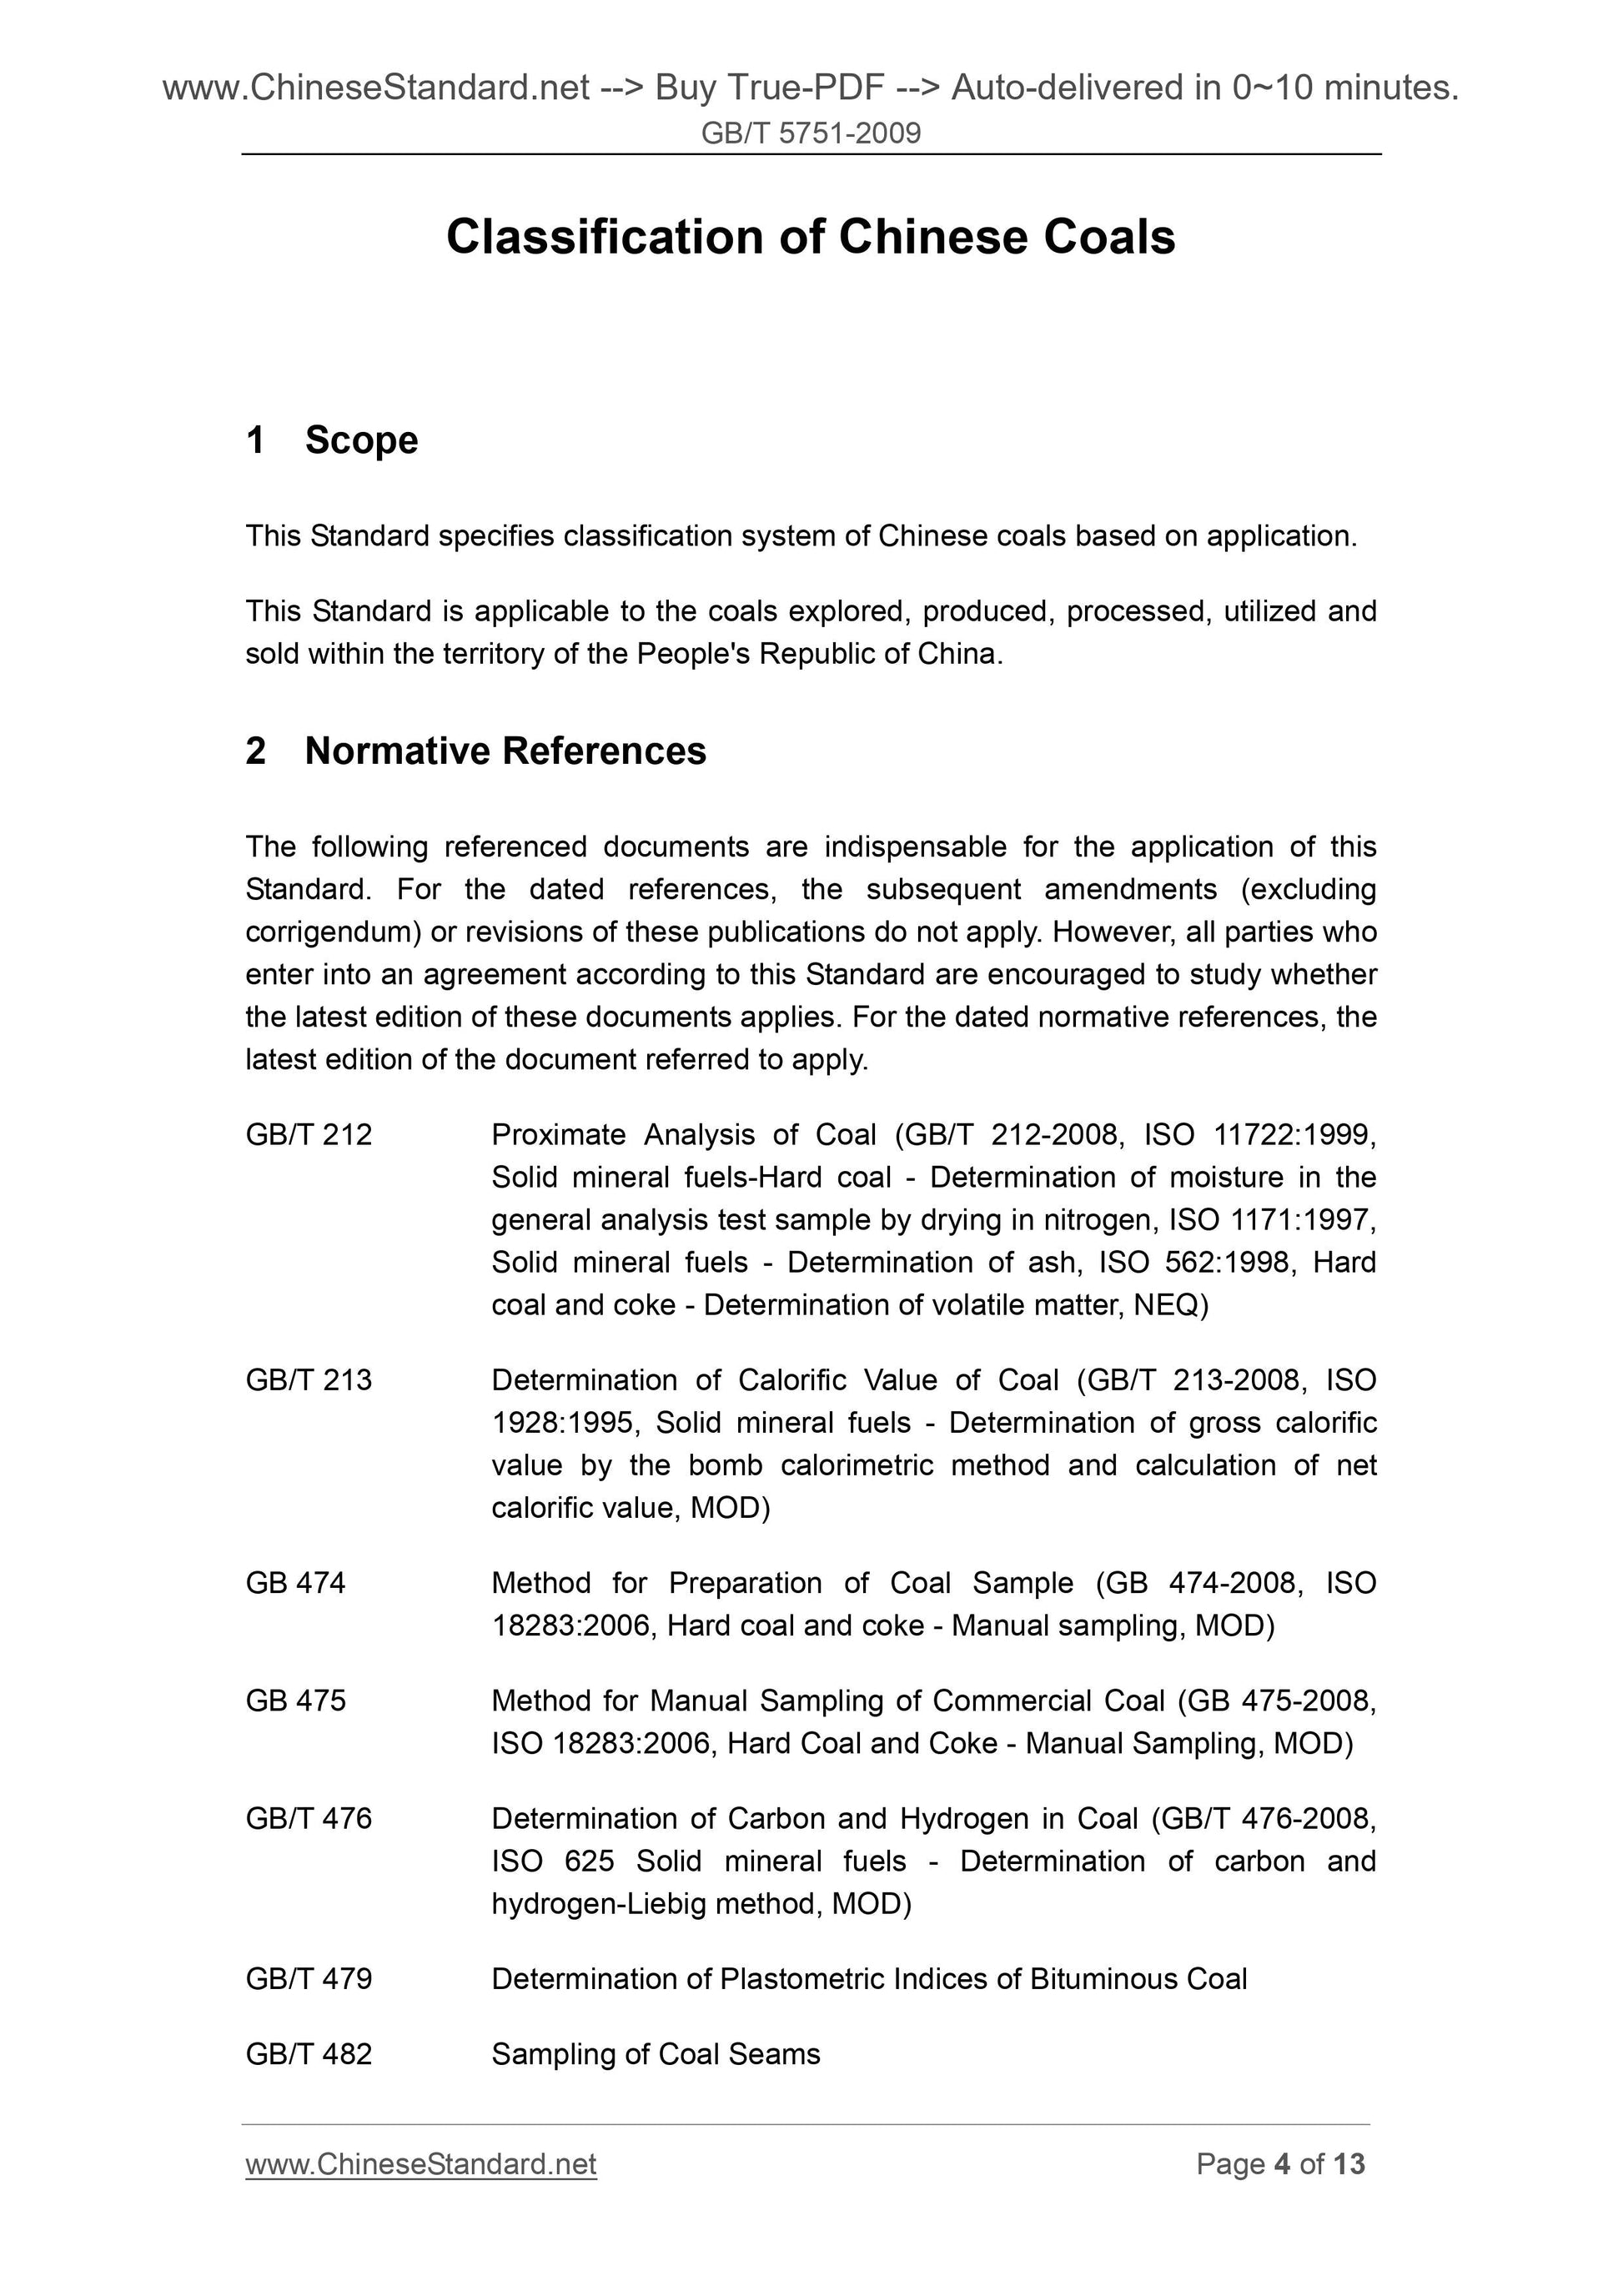 GB/T 5751-2009 Page 4